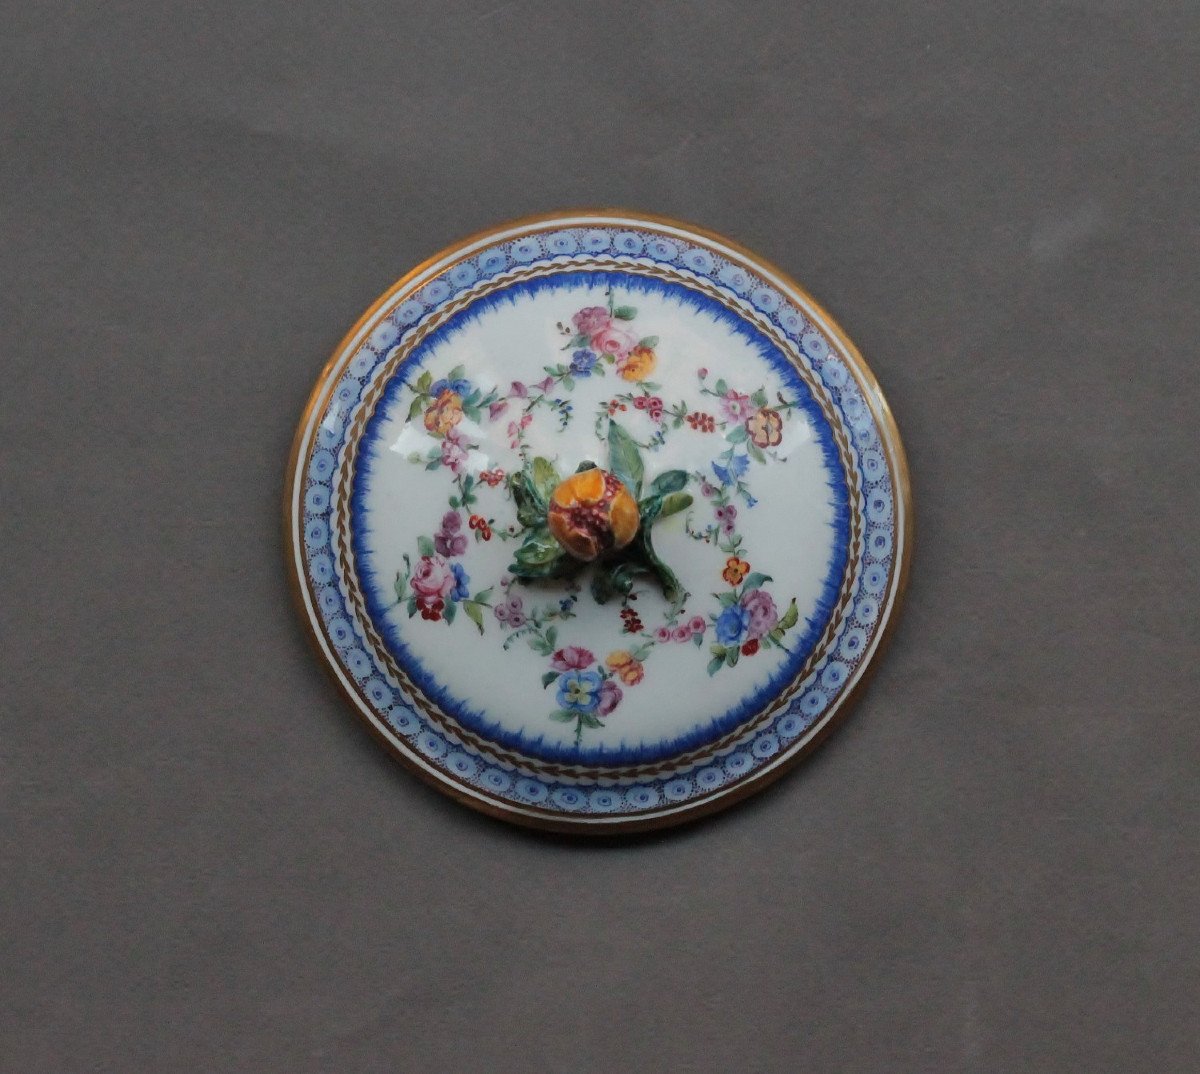 Tender Porcelain Bowl From Sèvres, Dd 1781, Sioux Painter And Gilder Chauvaux, 18th Century-photo-6